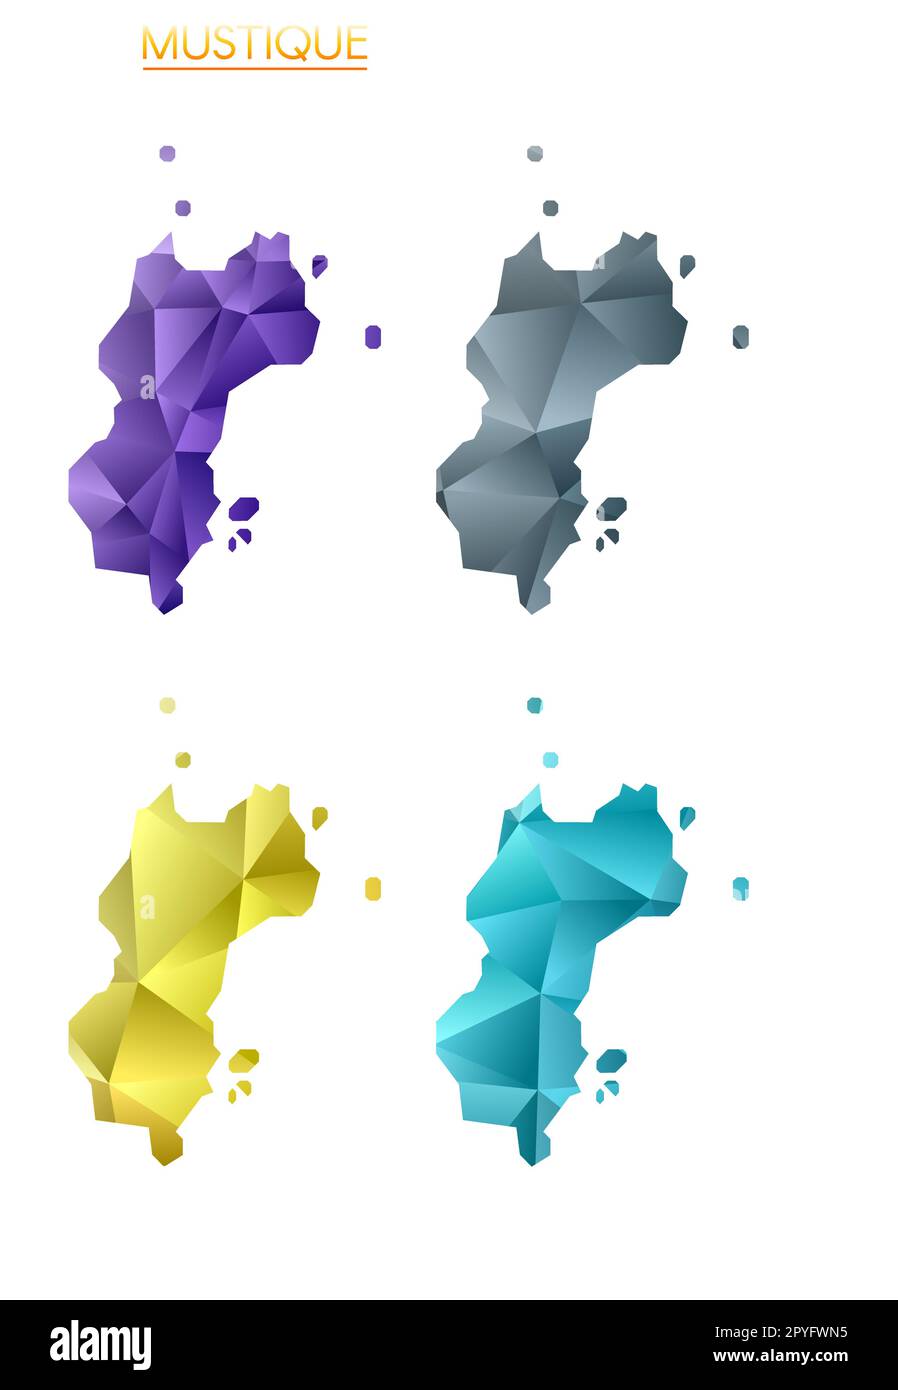 Set of vector polygonal maps of Mustique. Bright gradient map of island ...